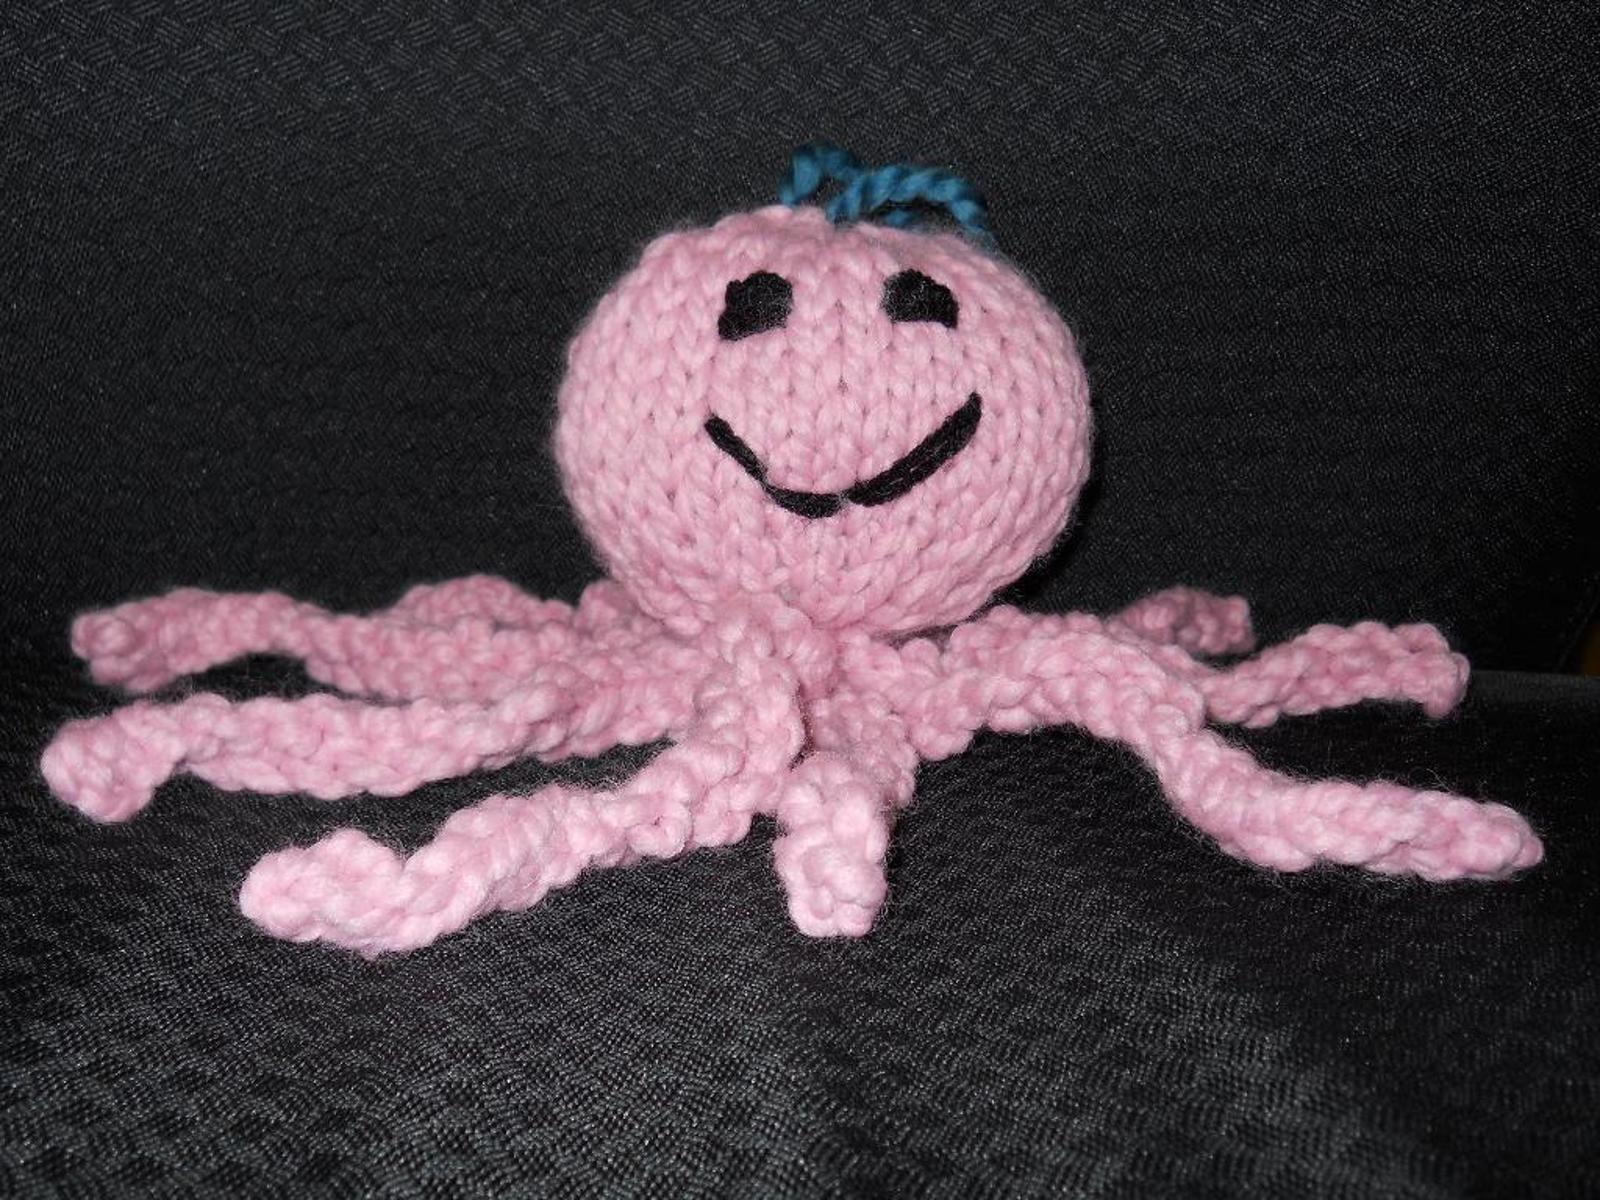 Octopus Knitting Pattern The Knit Octopus For Babies The Latest And Greatest Way To Give Back